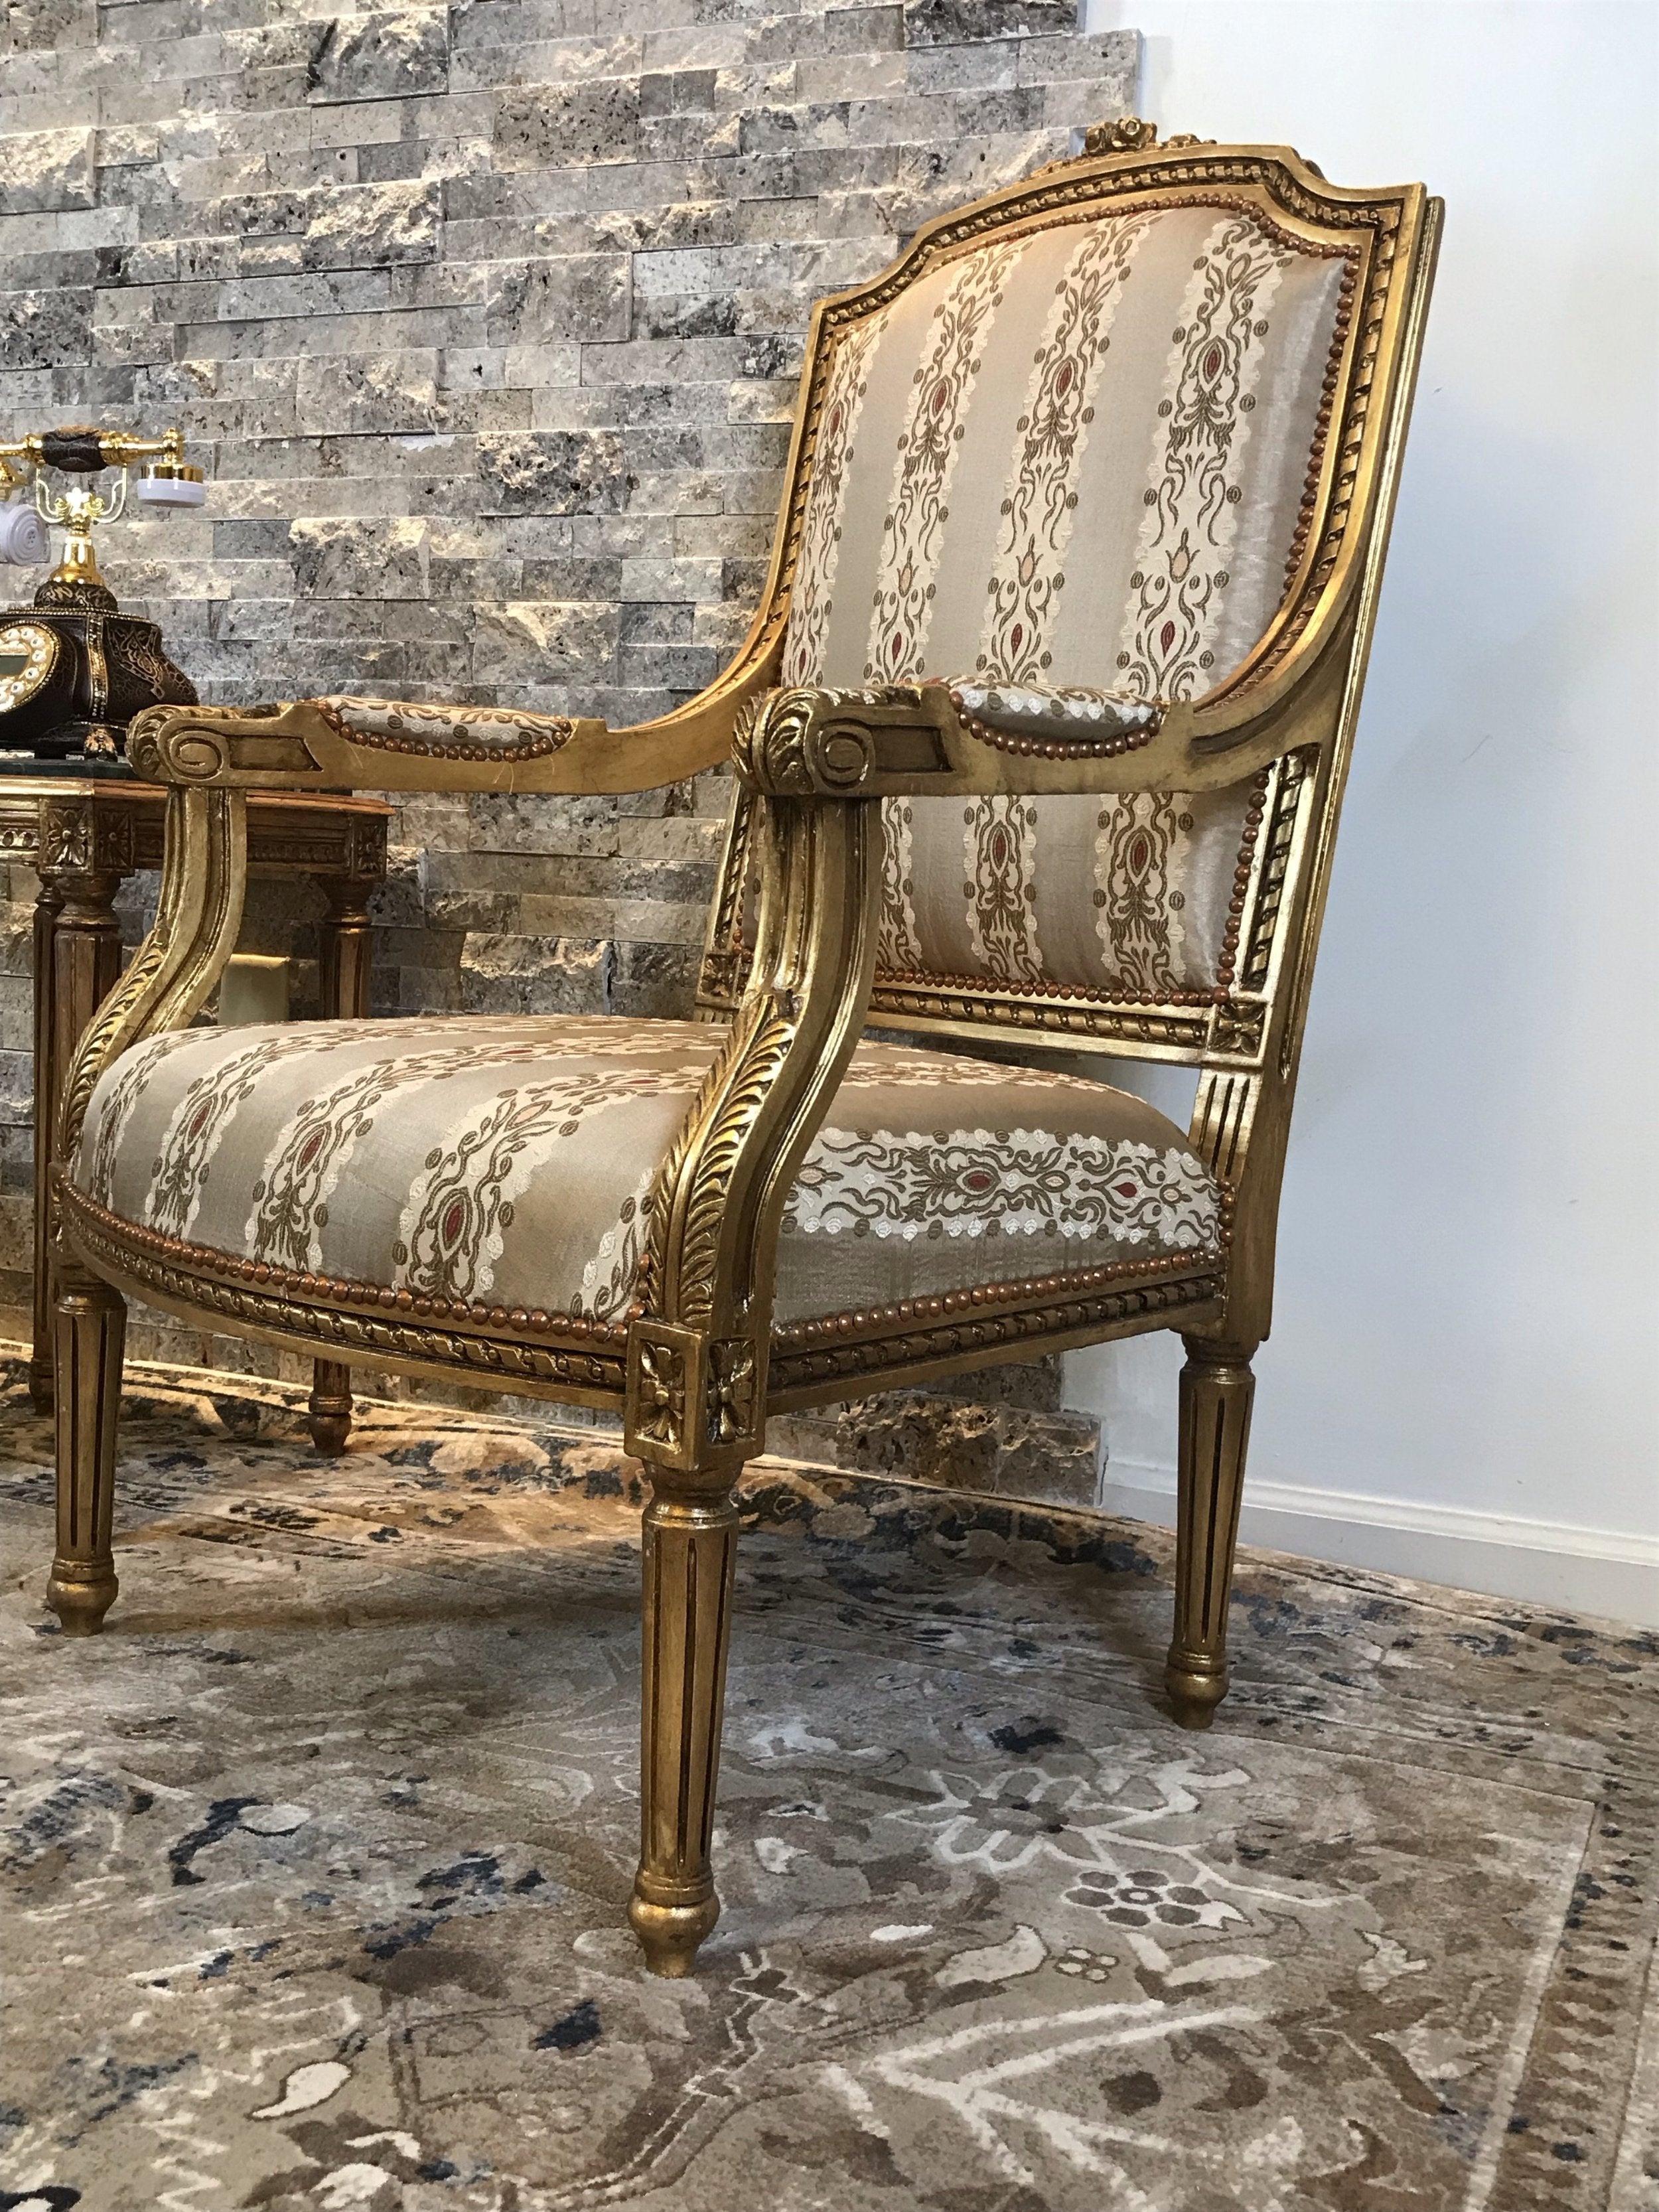 French Long Seated Chair Zan Zour Luxury Antiques